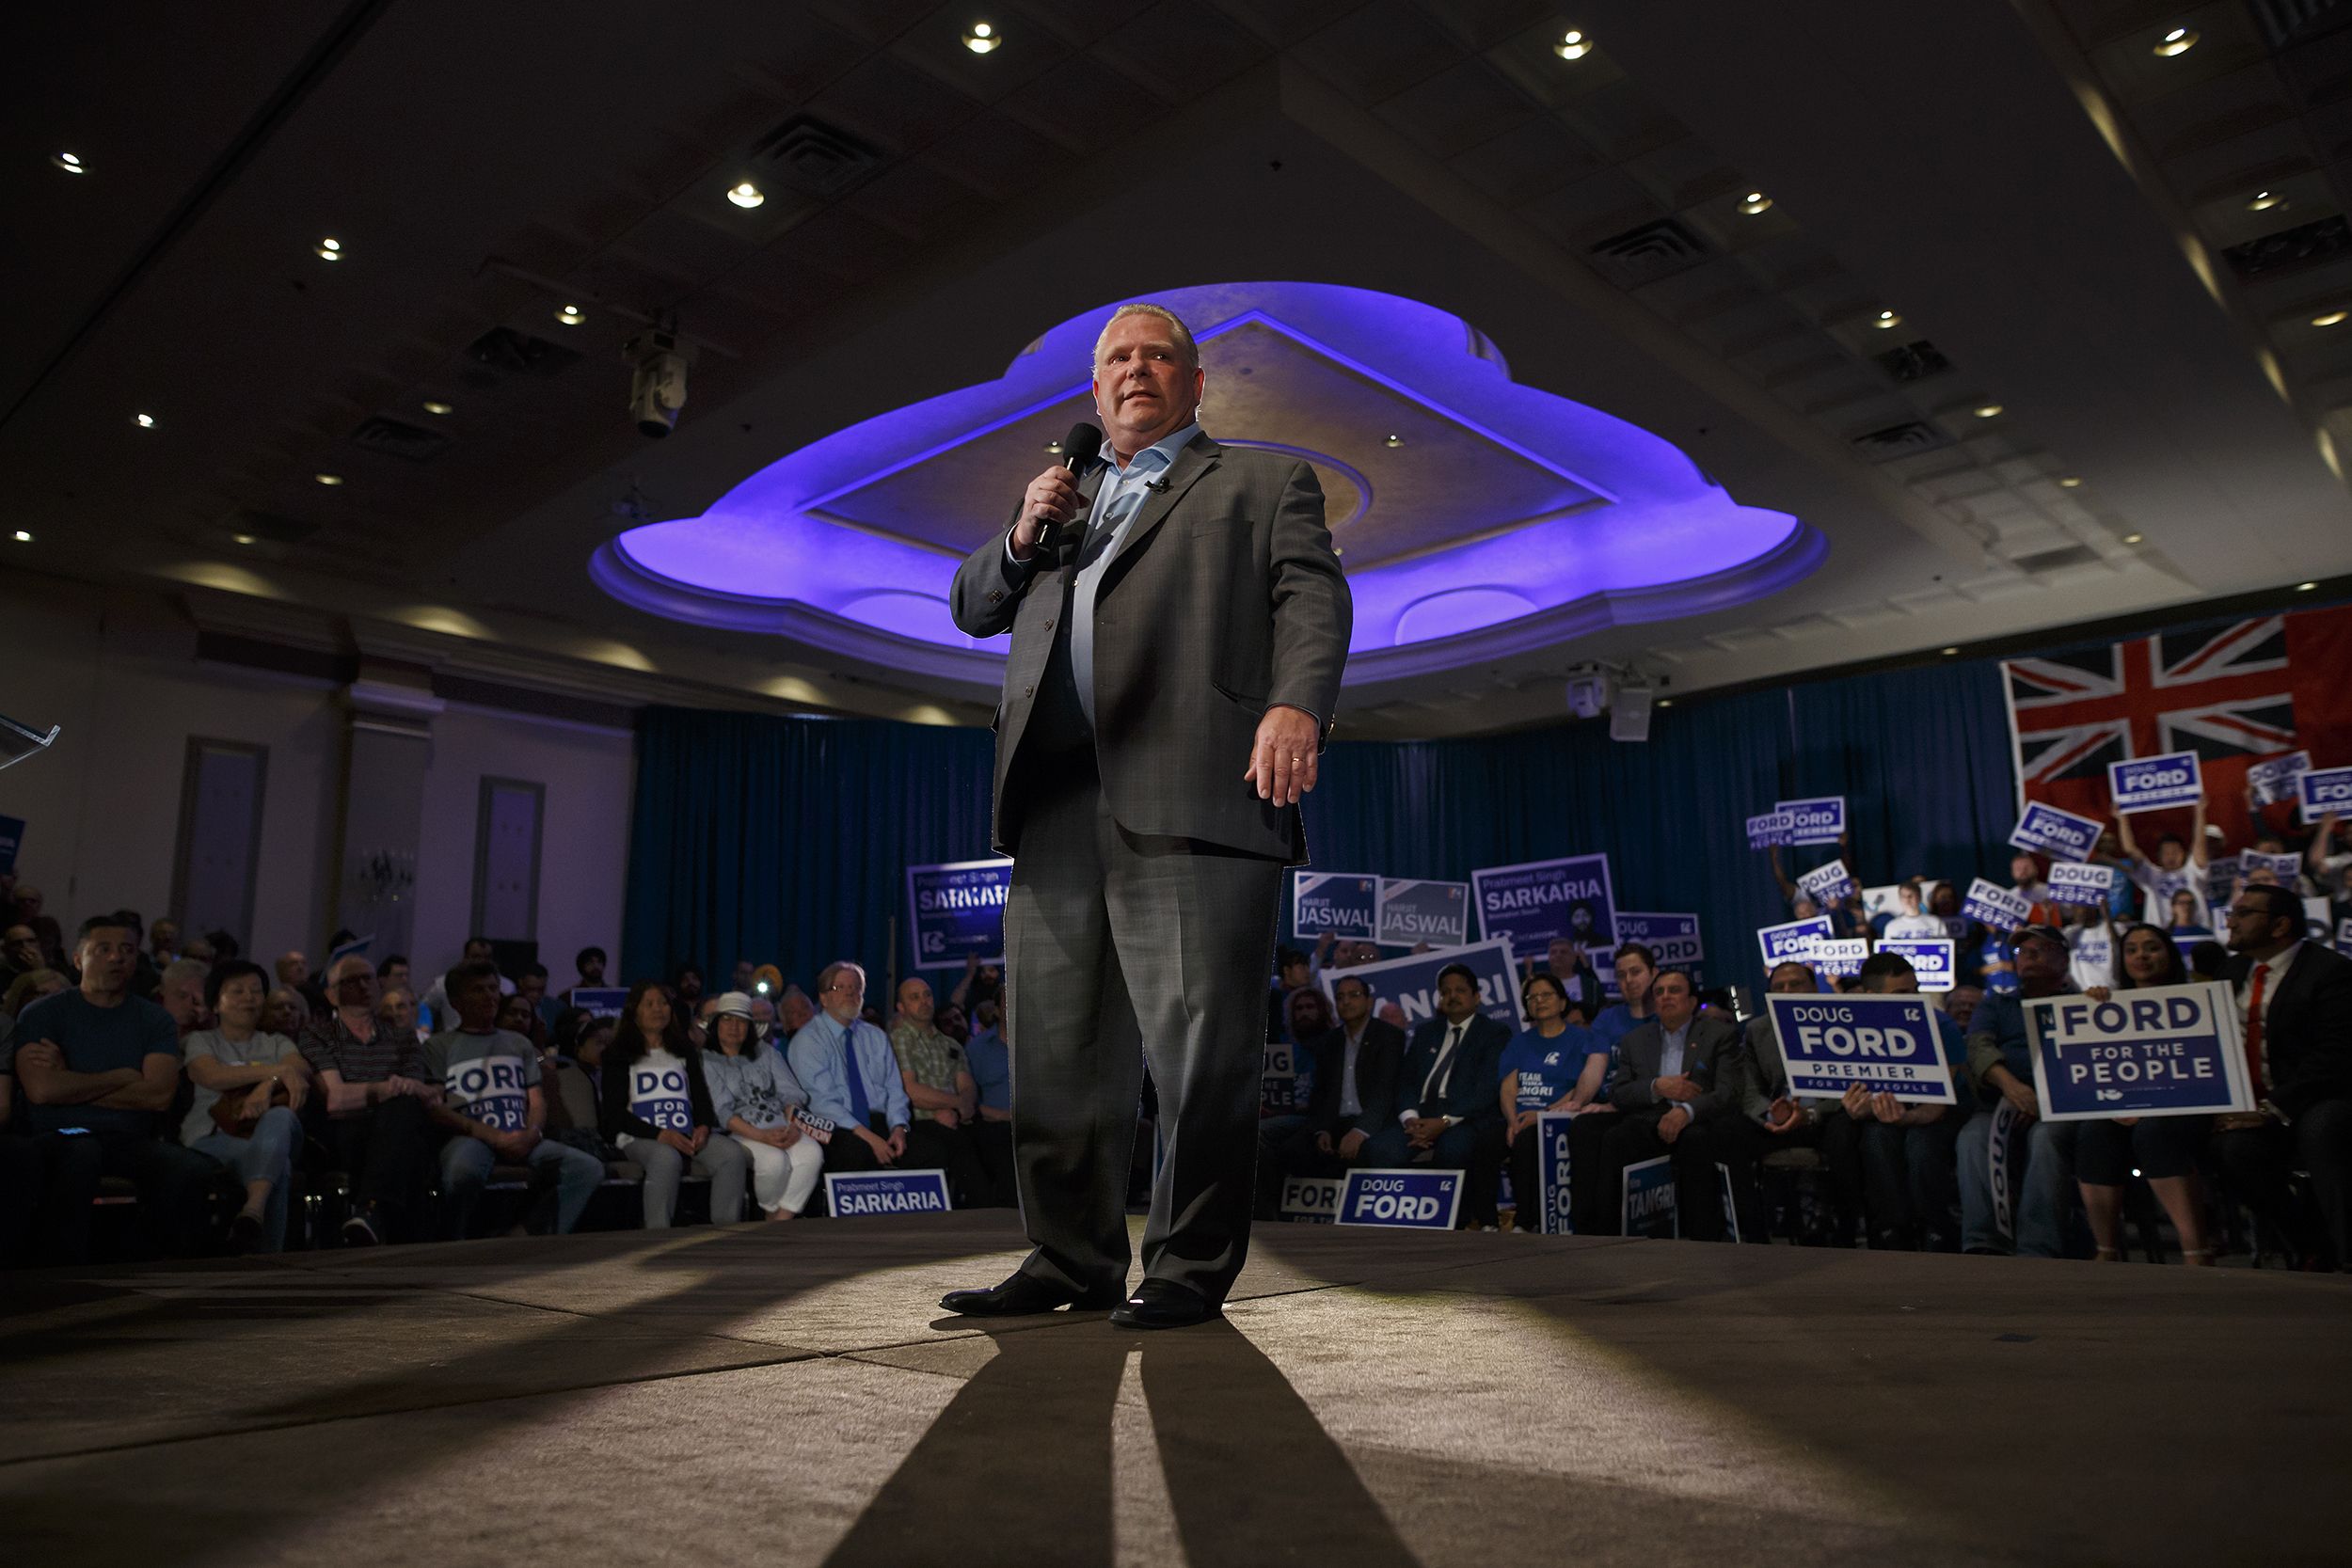 Ontario Premier Candidate Doug Ford Attends Campaign Events Ahead Of Election